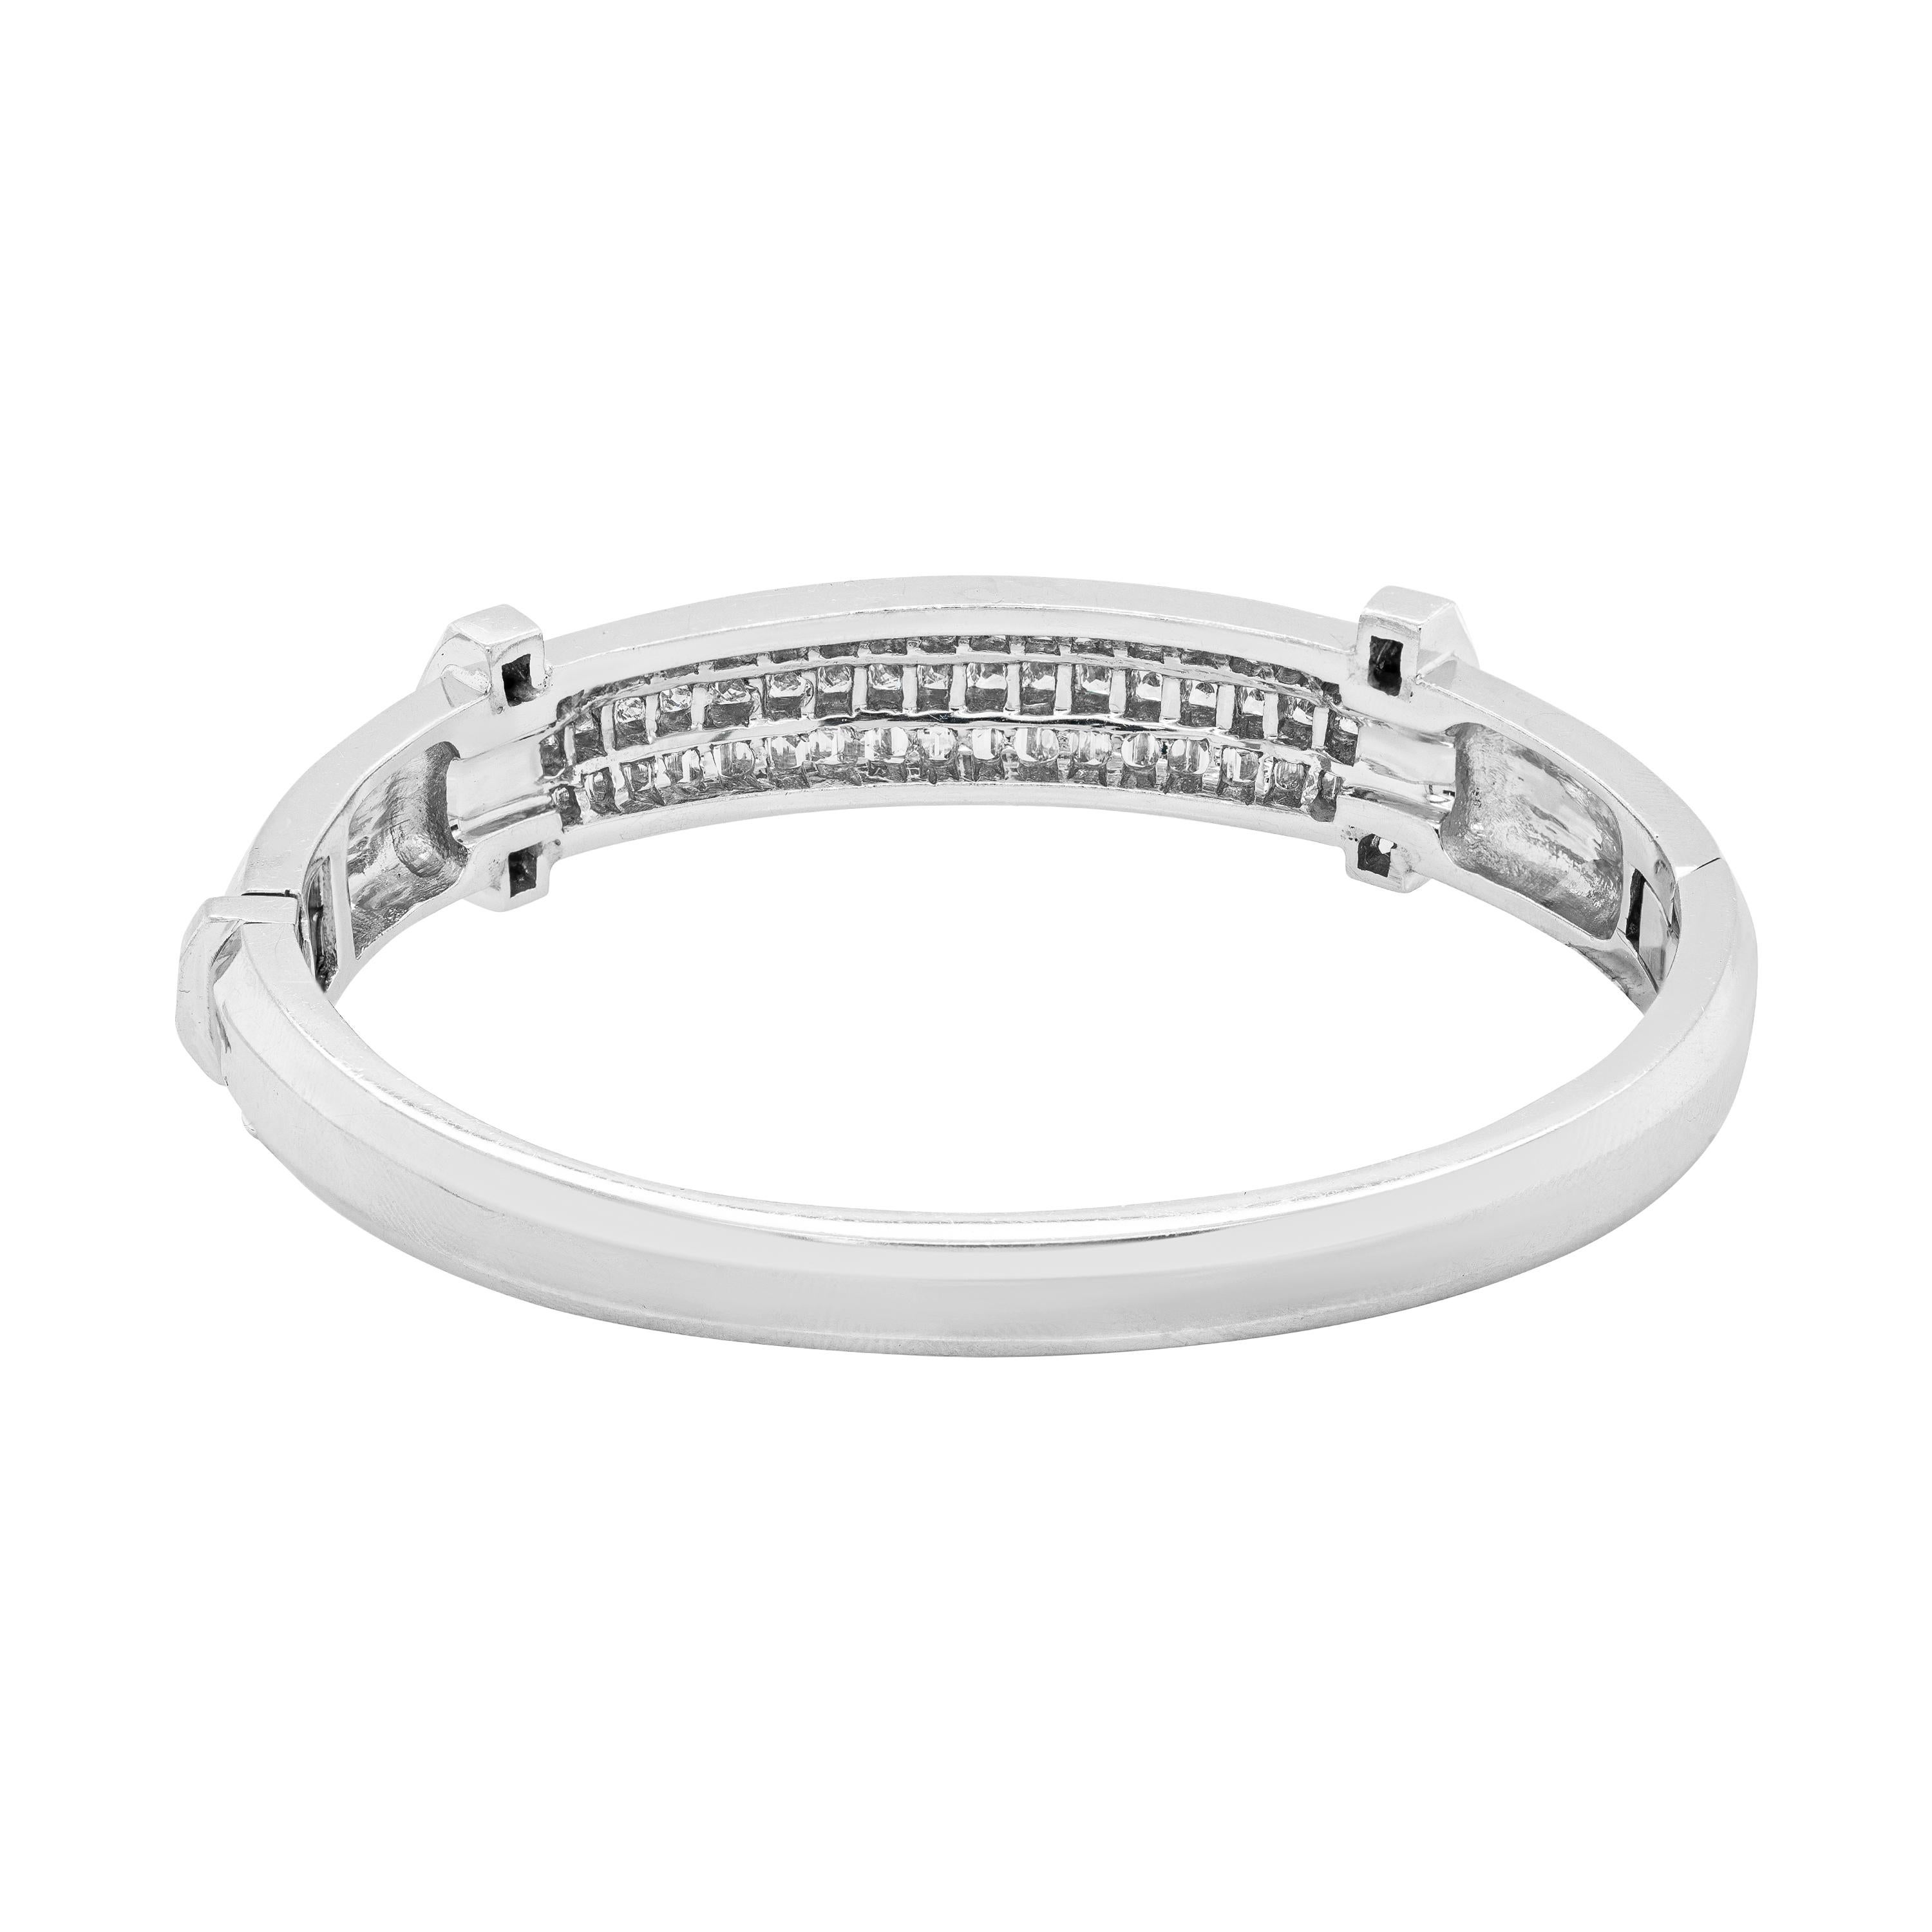 This wonderful bangle is centred with a row of 17 princes cut diamonds beautifully bordered by other two rows of 25 baguette cut diamonds each, all channel set in 18 carat white gold, open back settings. The three rows of diamonds are flanked